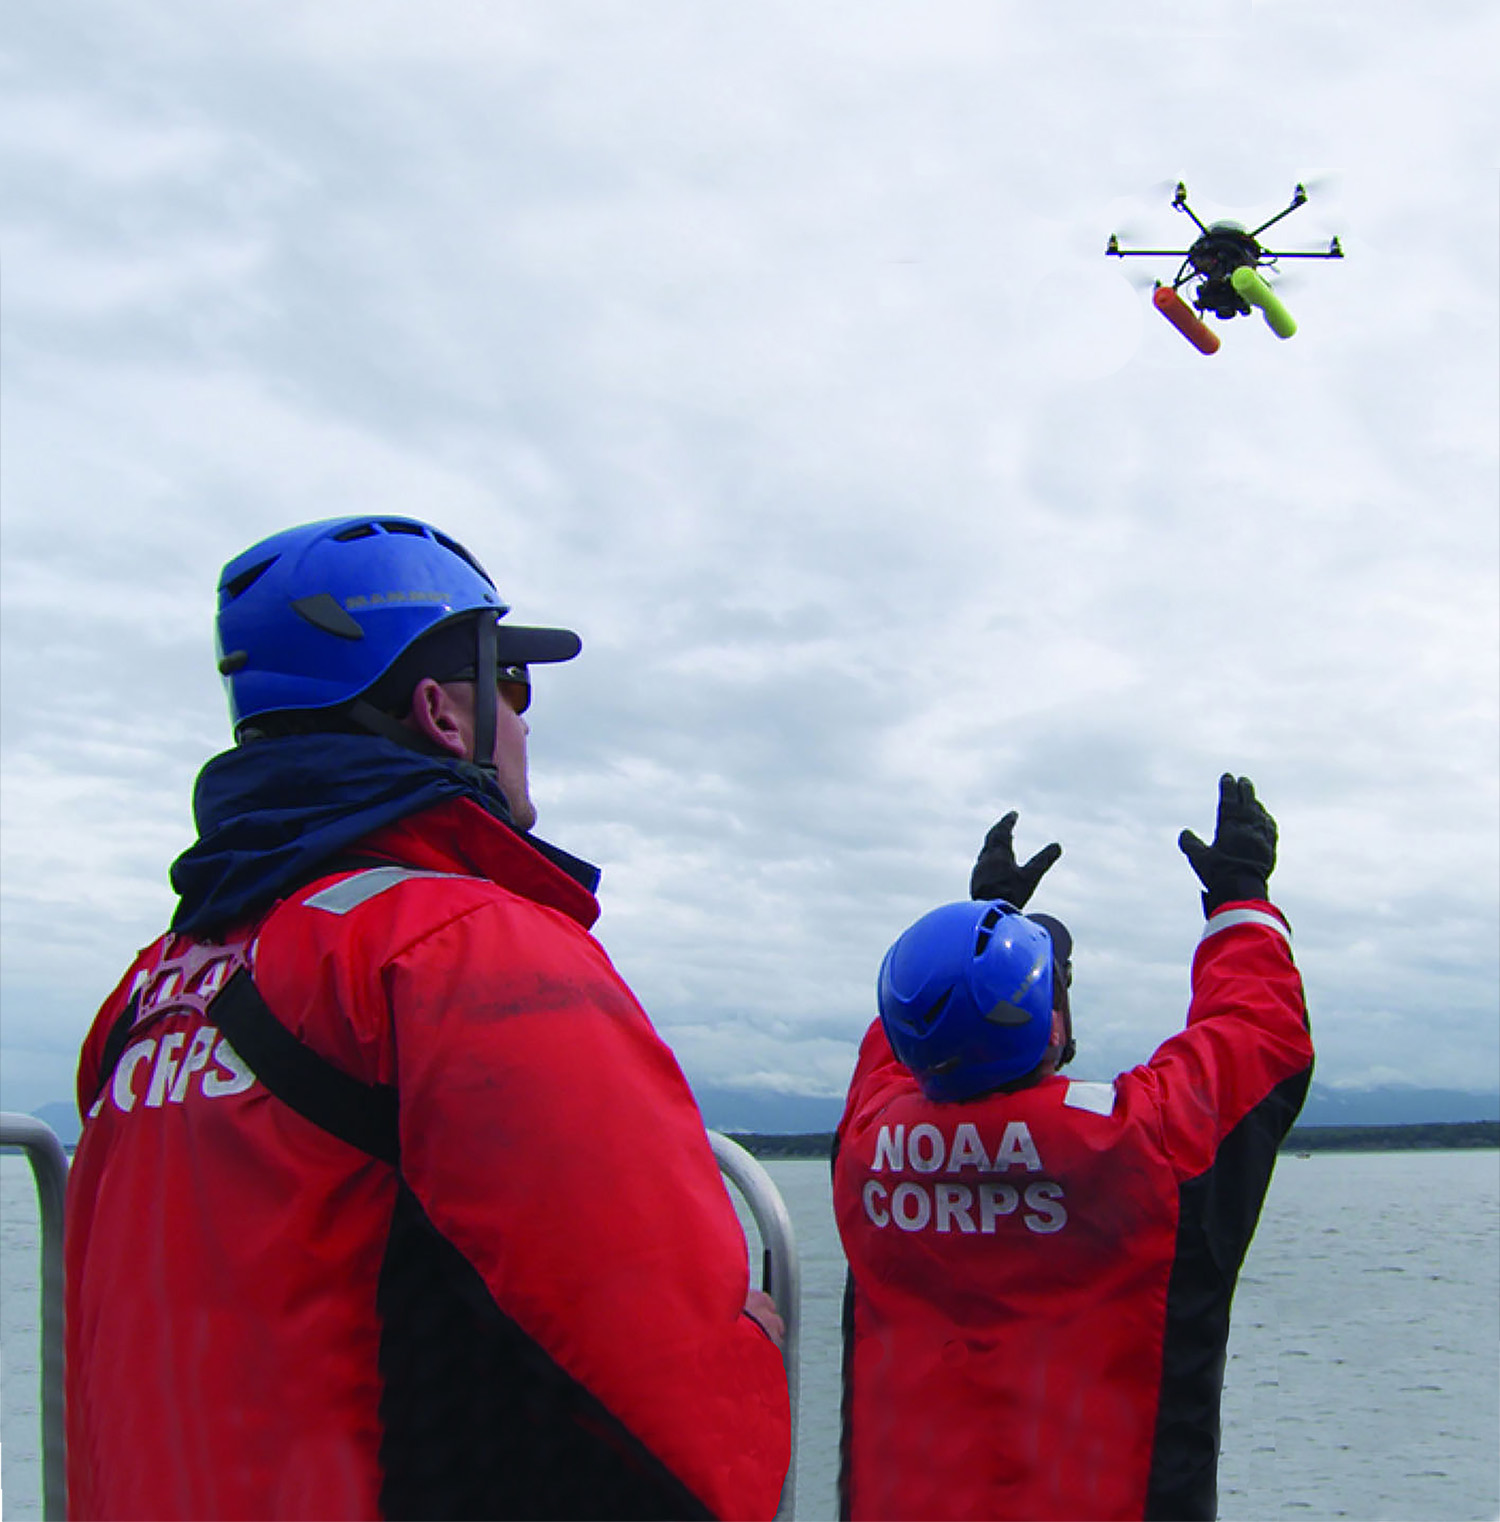 This hexacopter, a remote-controlled, helicopter-like drone, collects photos of endangered beluga whales in Cook Inlet, Alaska. Measurements from many hundreds of photographs help determine birth and death rates and other health markers. Annual late summer surveys help compare birth rates to factors such as the strength of salmon runs. Salmon are a vital food source for beluga whales. 